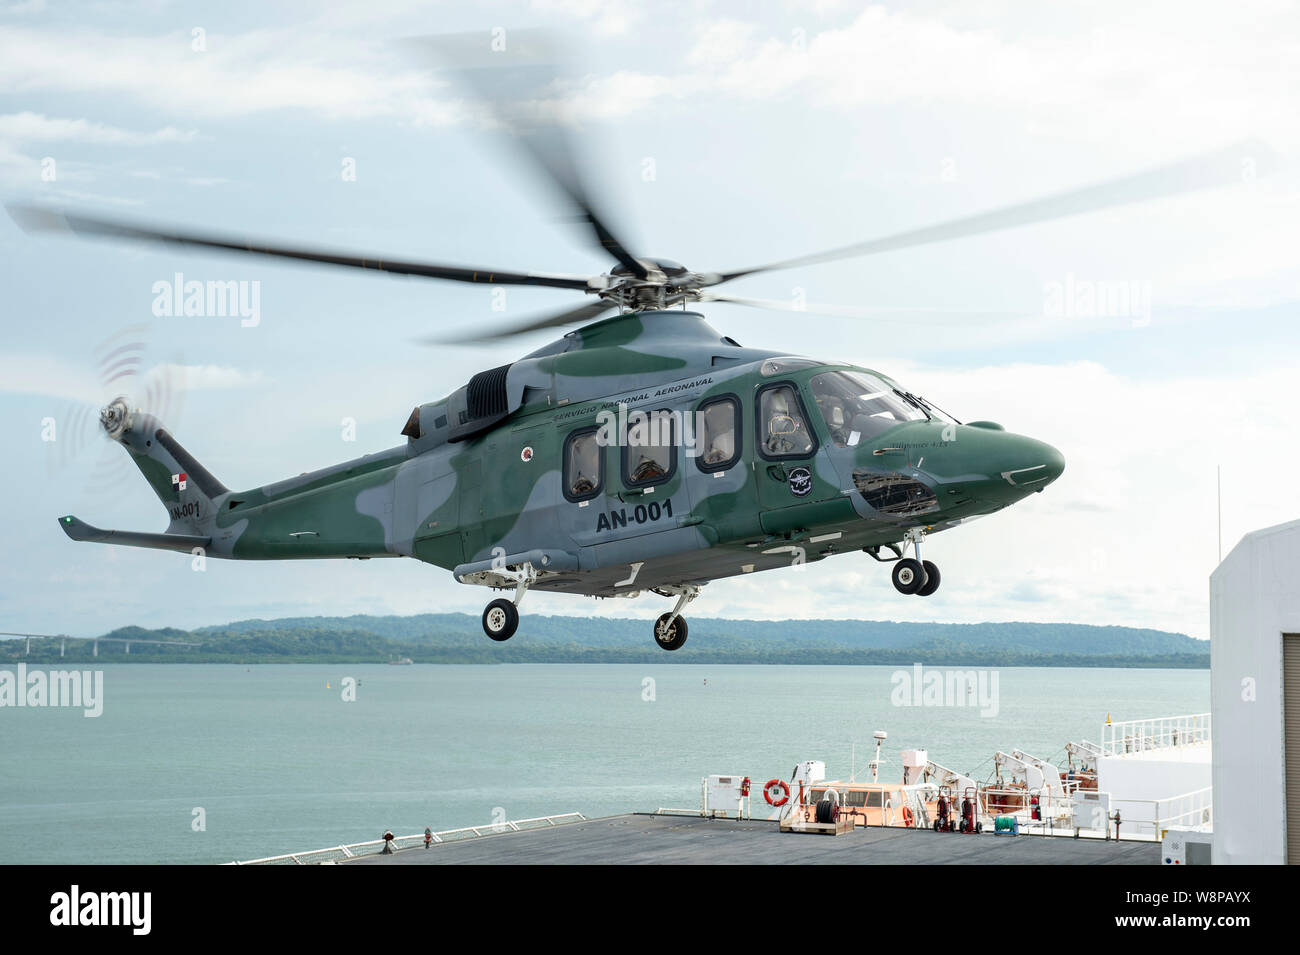 190808-N-DZ642-1094 COLON, Panama (Aug. 8, 2019) An AW-139 helicopter, assigned to Panama's Servicio Nacional Aeronaval, carrying Panamanian President Laurentino Cortizo, lands on the flight deck of the hospital ship USNS Comfort (T-AH 20). Comfort is working with health and government partners in Central America, South America, and the Caribbean to provide care on the ship and at land-based medical sites, helping to relieve pressure on national medical systems strained by an increase in Venezuelan migrants. (U.S. Navy photo by Mass Communication Specialist 2nd Class Bobby J Siens) Stock Photo